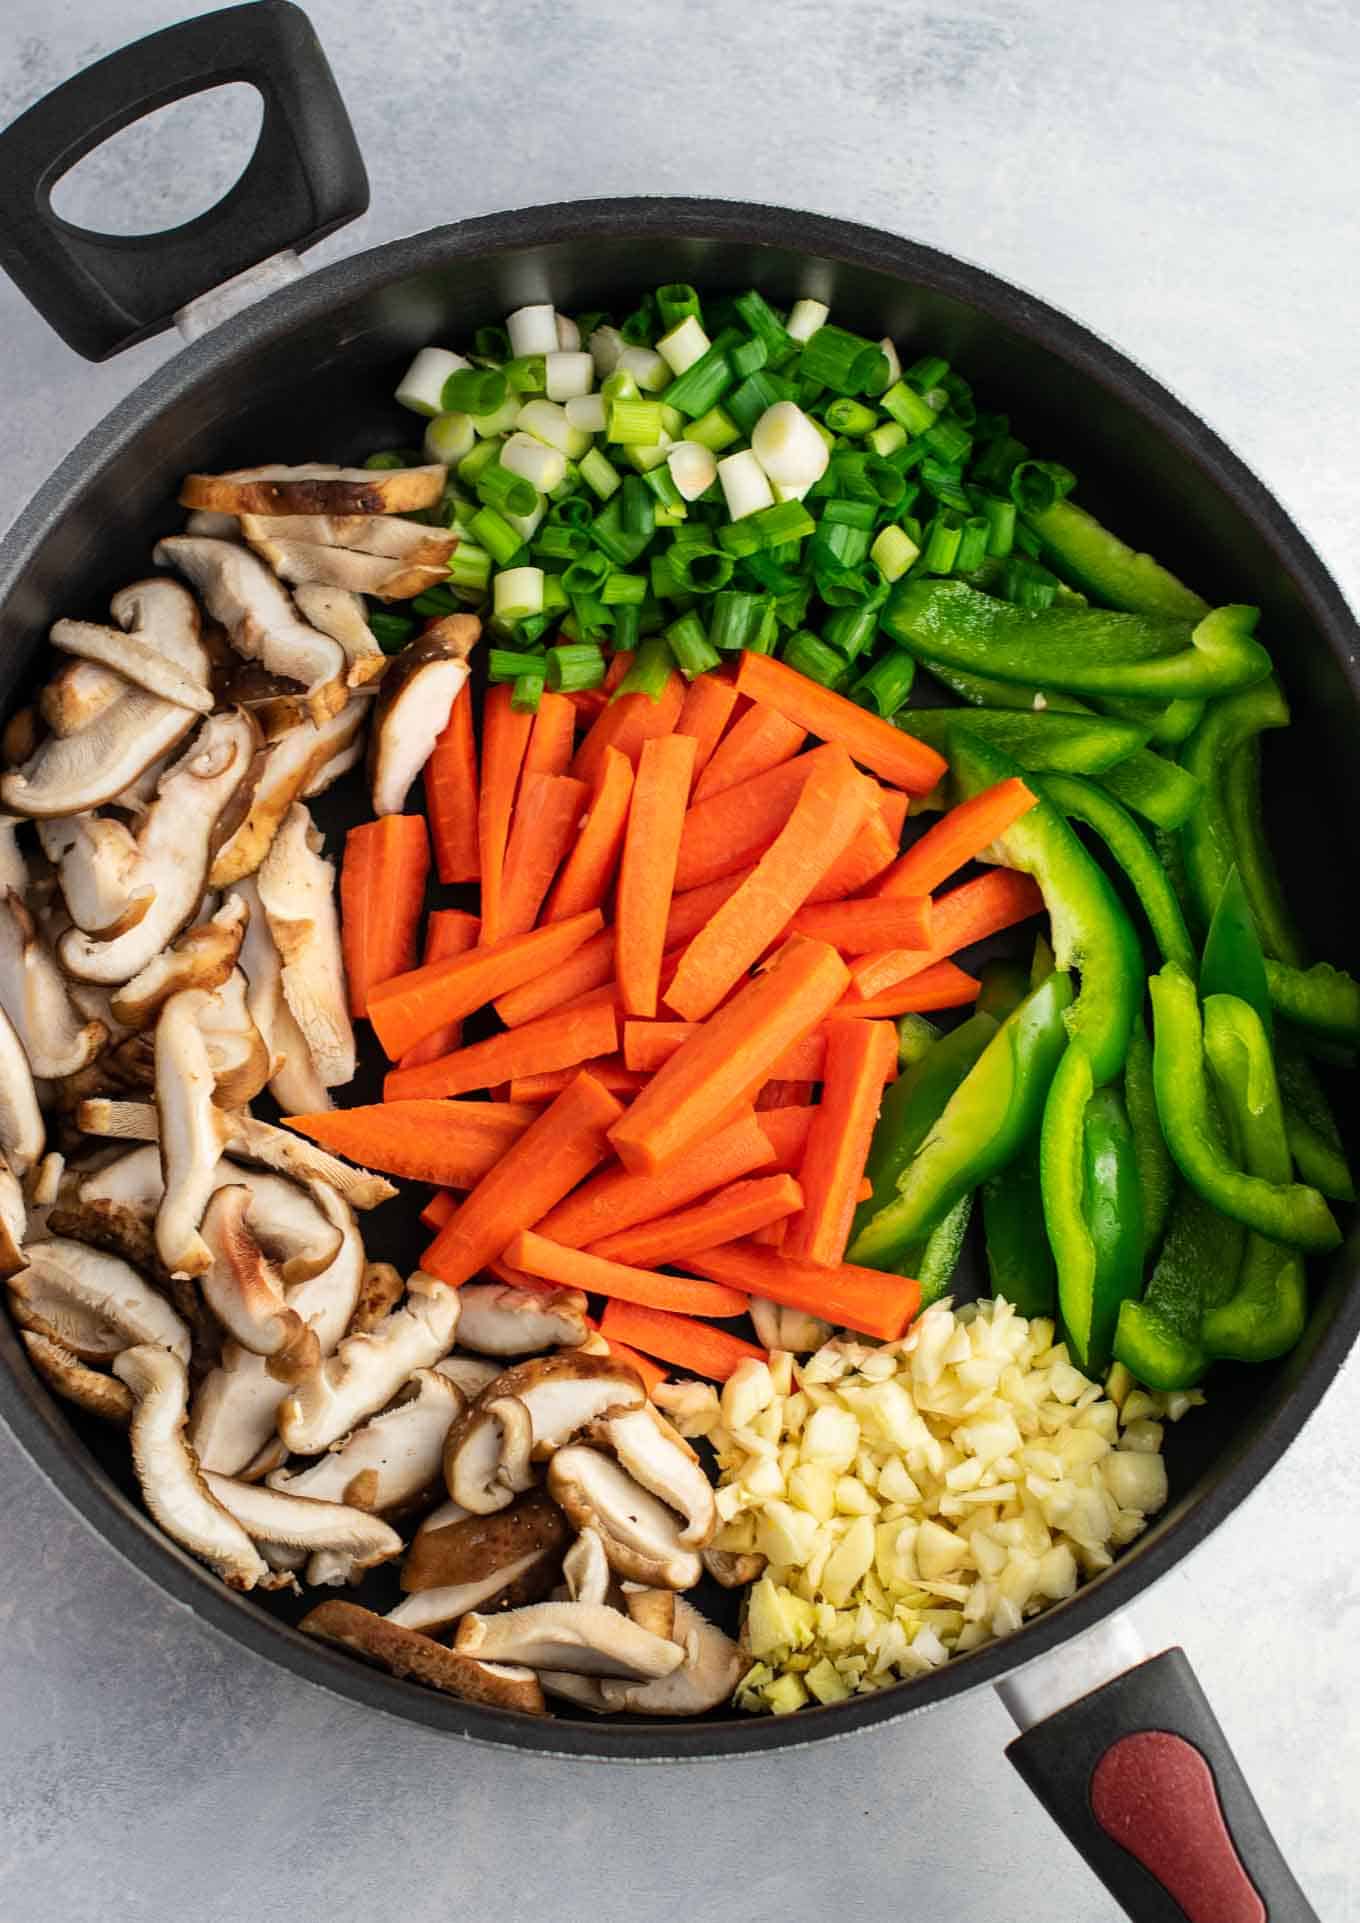 golden oak shitake mushrooms, sugar snap peas, green bell pepper, carrots, green onions, and fresh garlic and ginger in a skillet